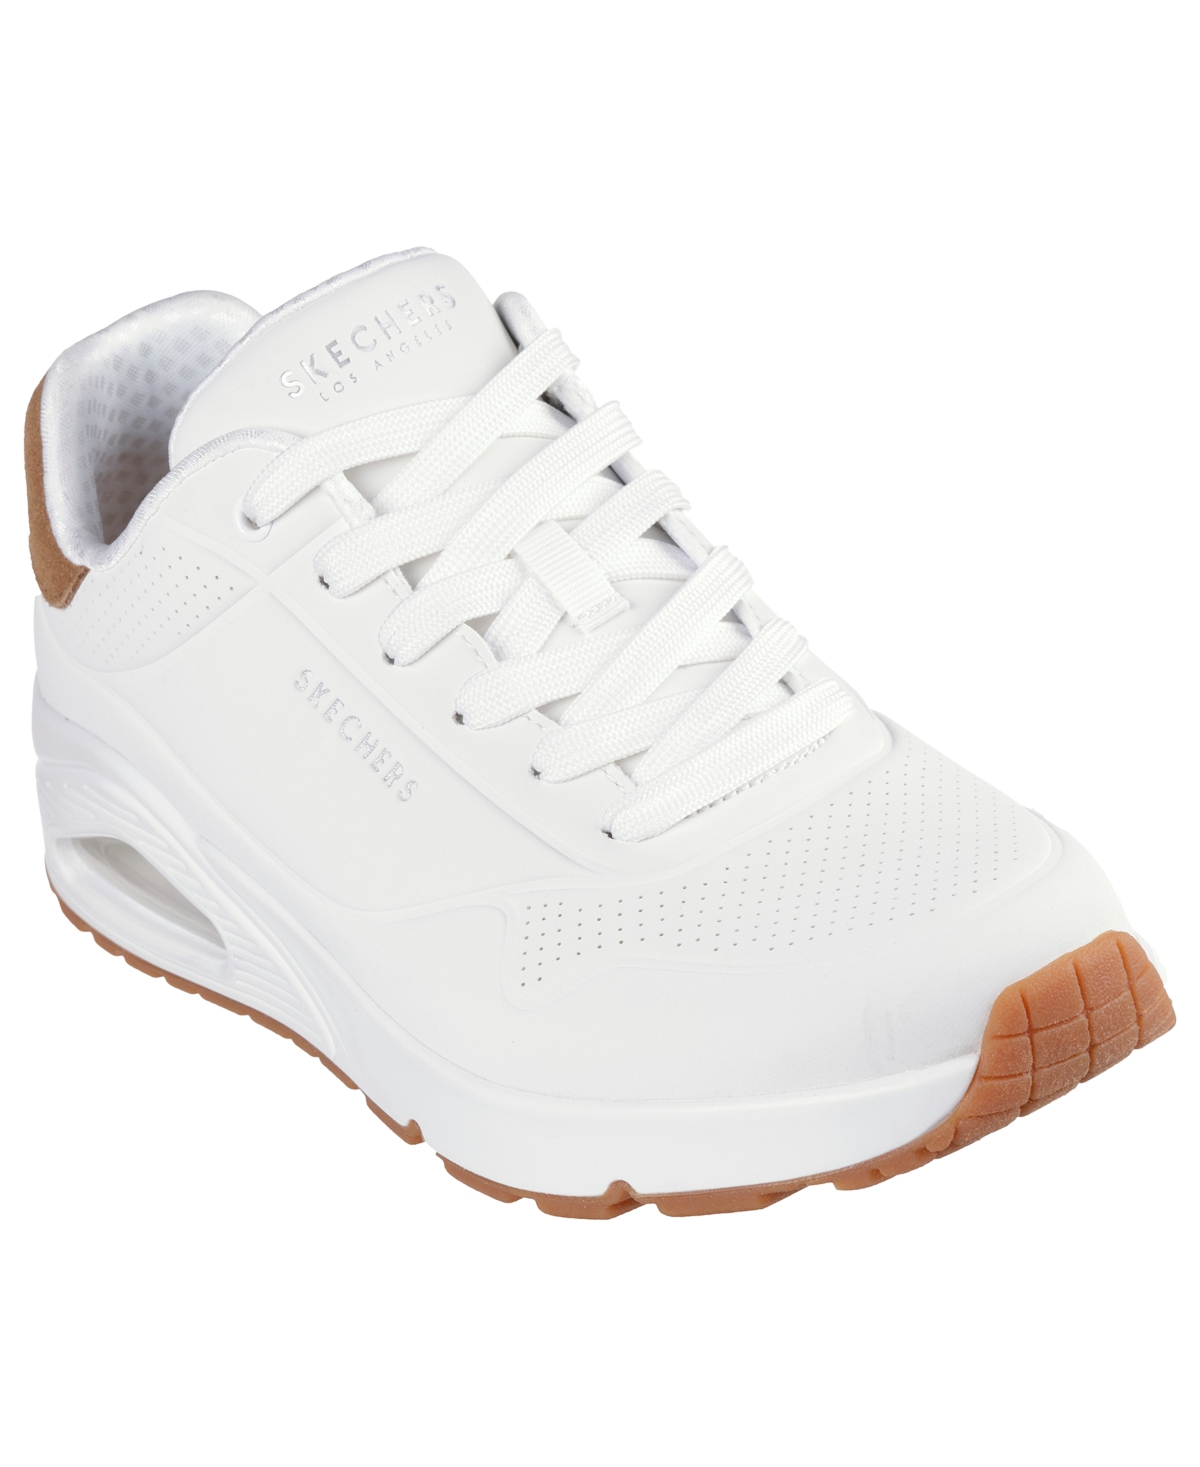 Men's Casual Sneakers from Finish Line - White